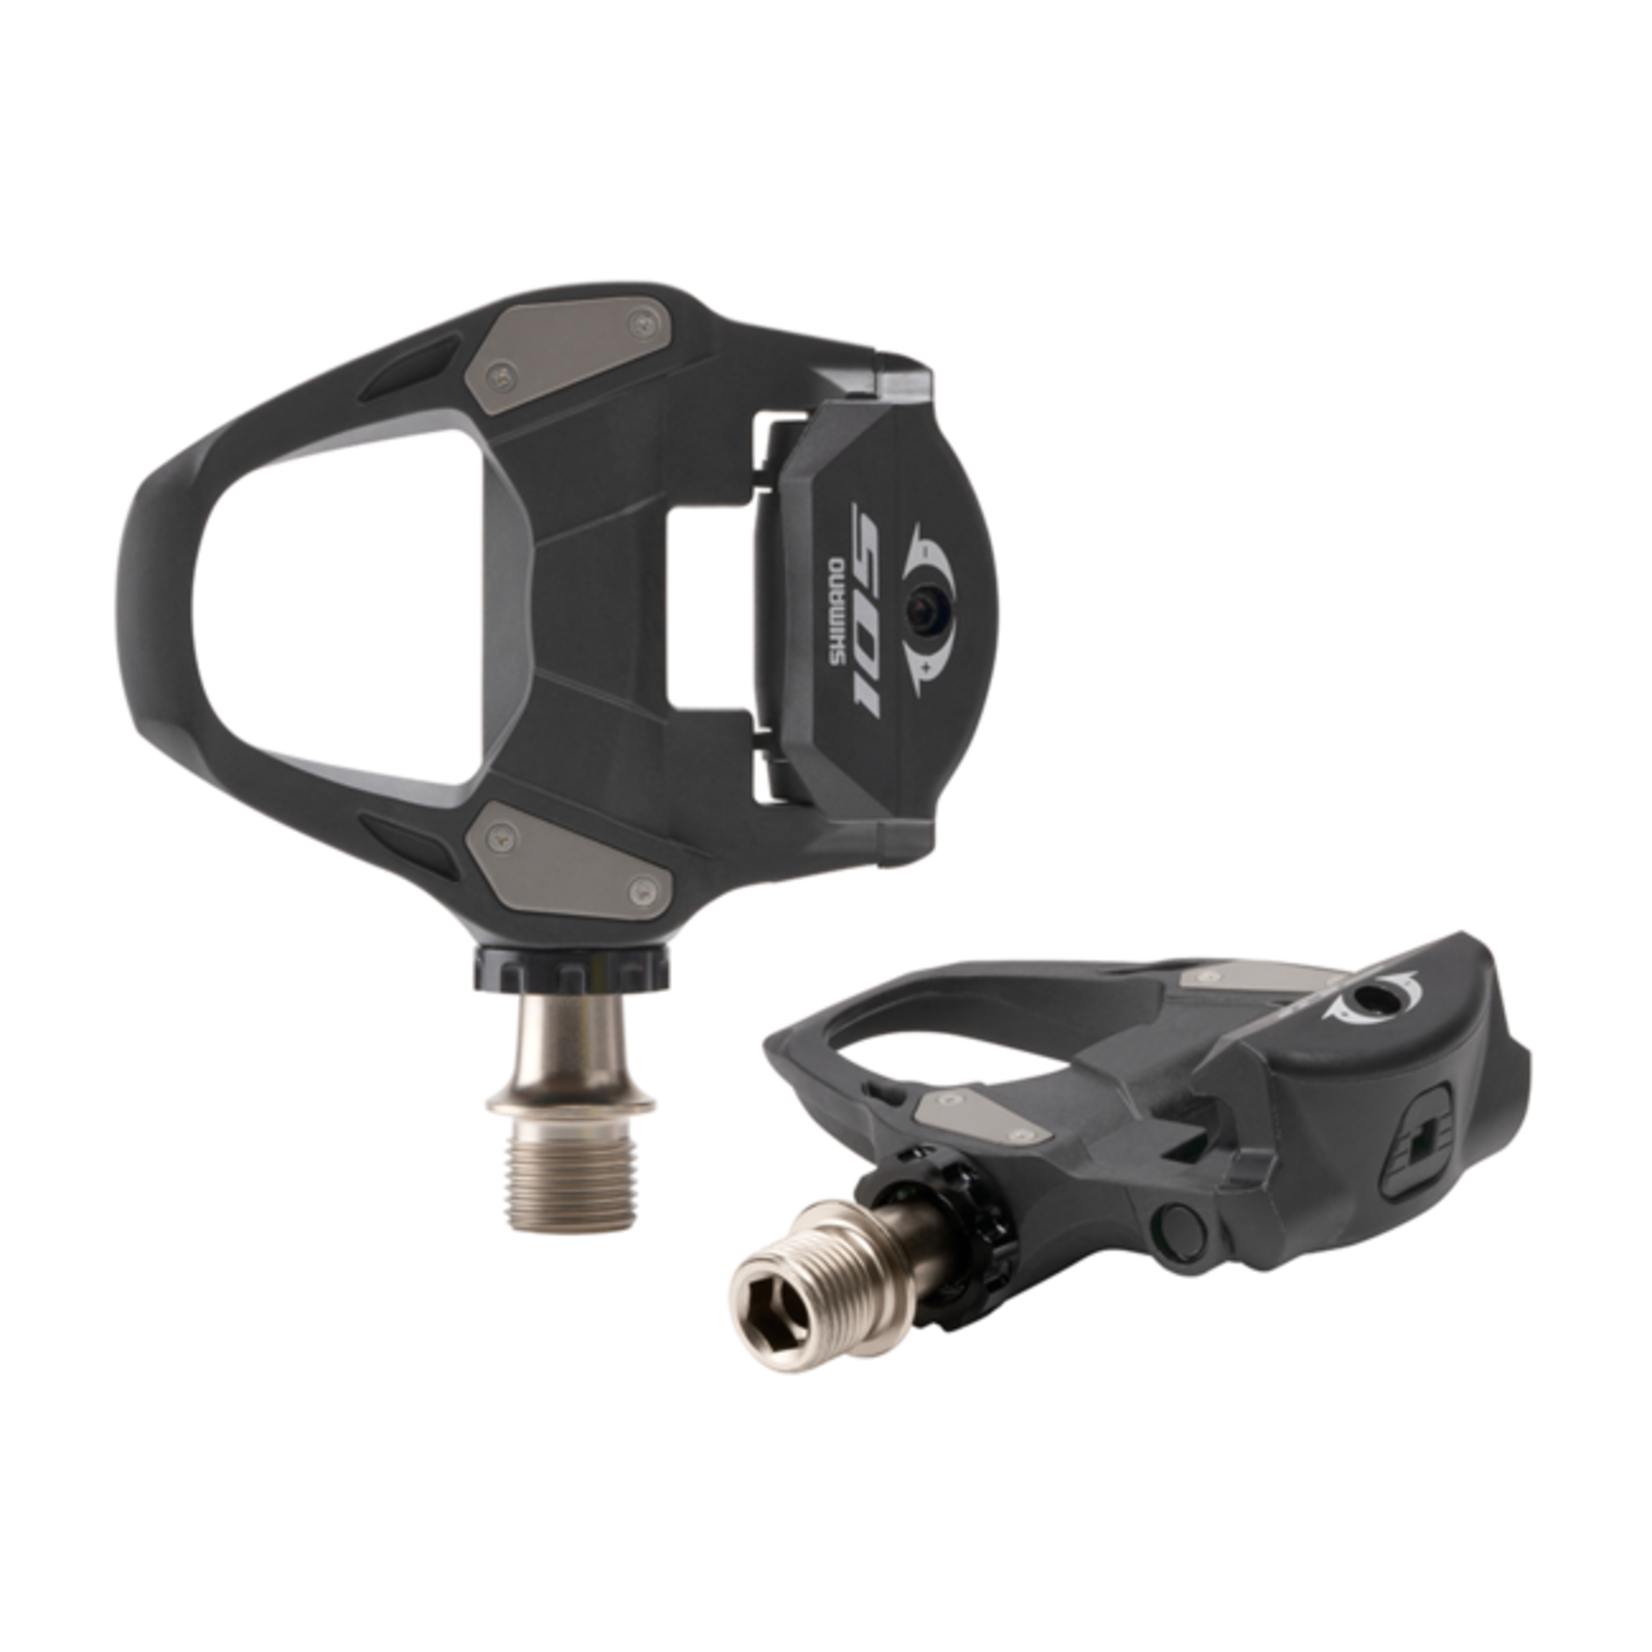 SHIMANO PEDAL, PD-R7000, 105, SPD-SL PEDAL, W/CLEAT